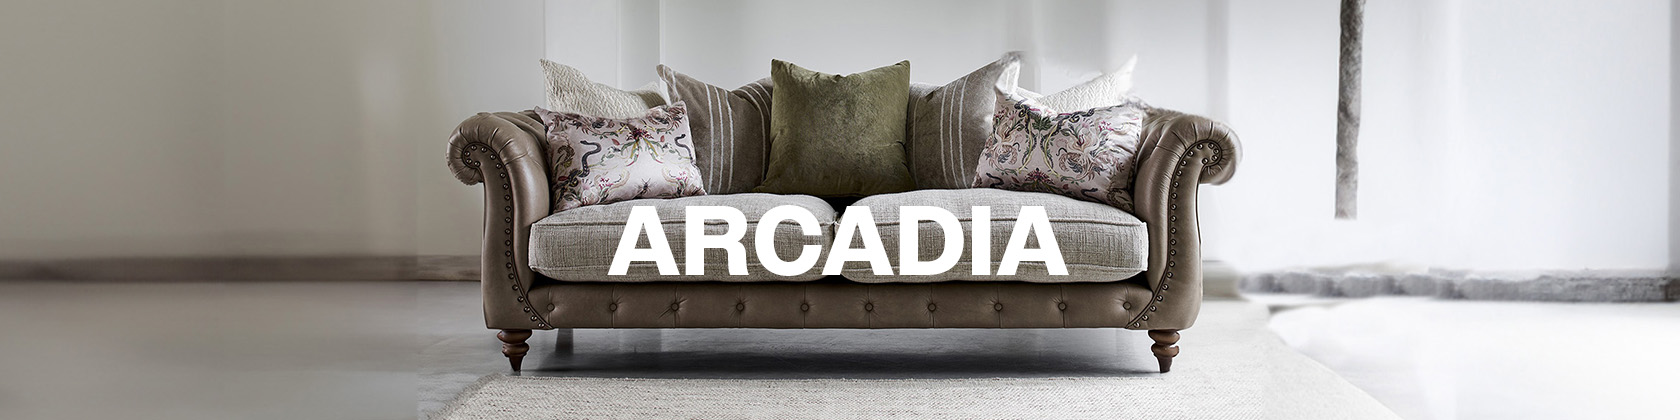 arcadia-banner-amended